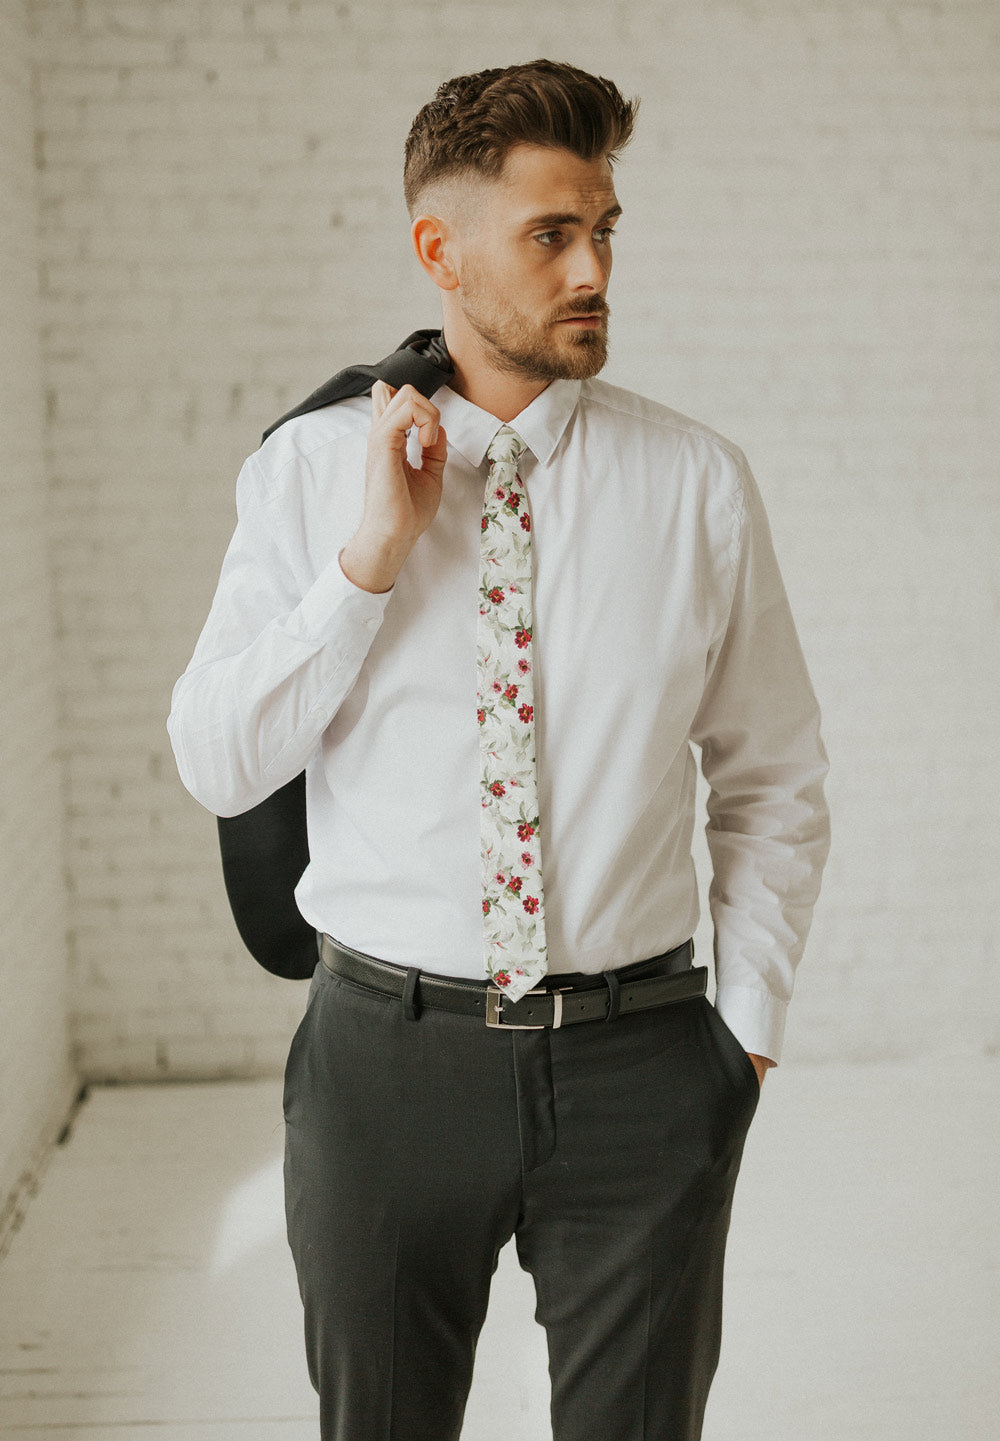 Red Clover tie worn with a white shirt, black belt and black pants.